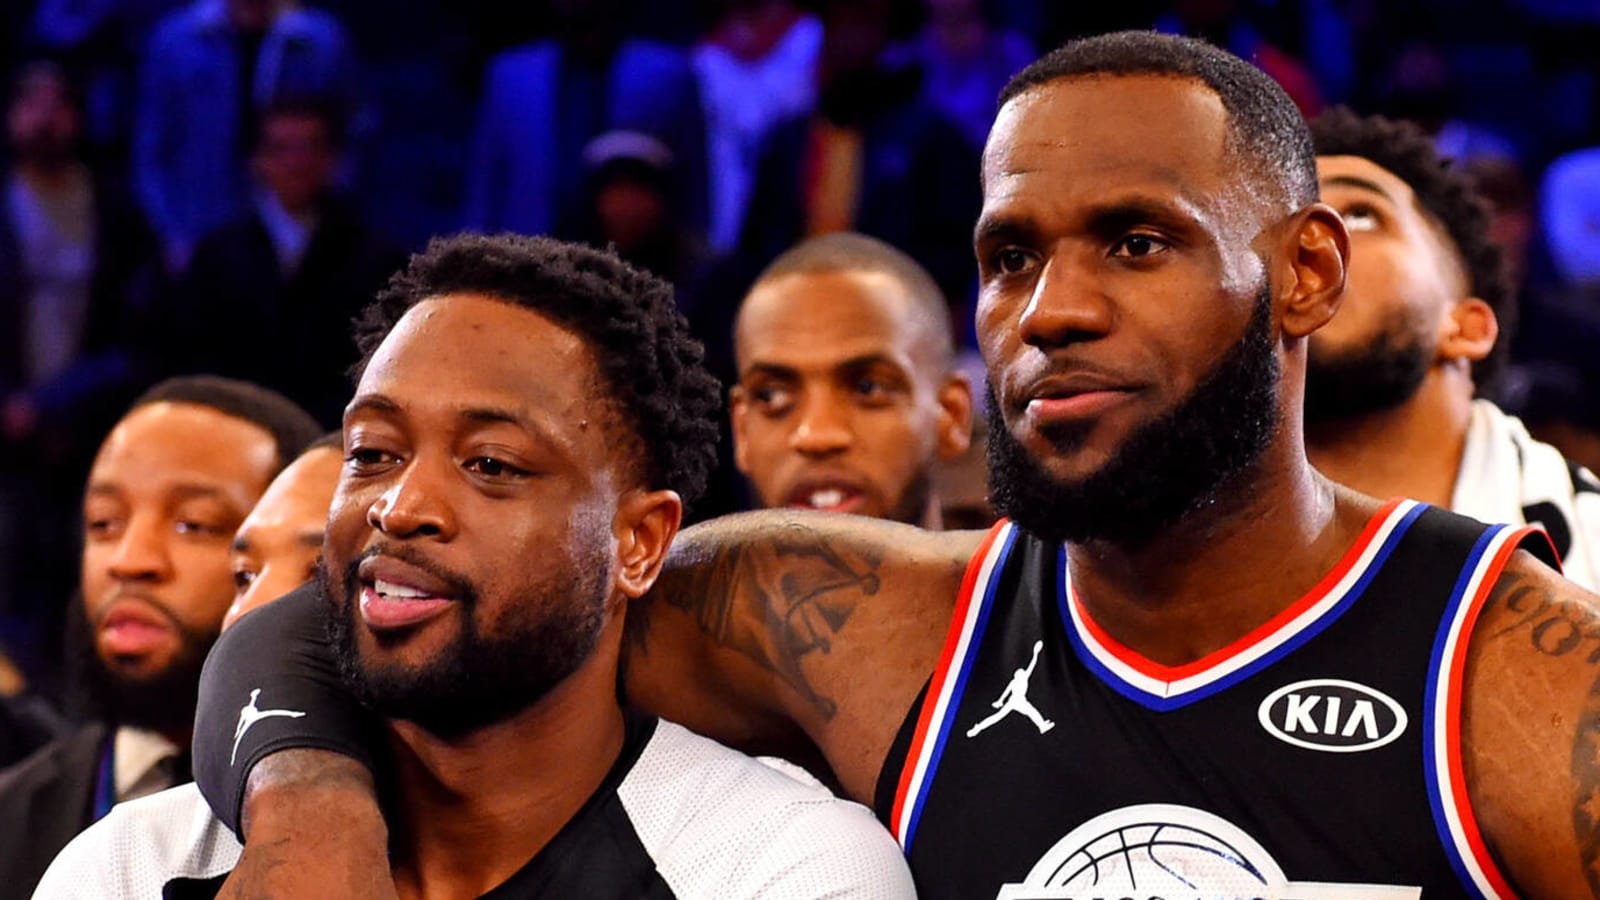 LeBron James and Dwyane Wade to produce 'The Redeem Team' documentary for Netflix